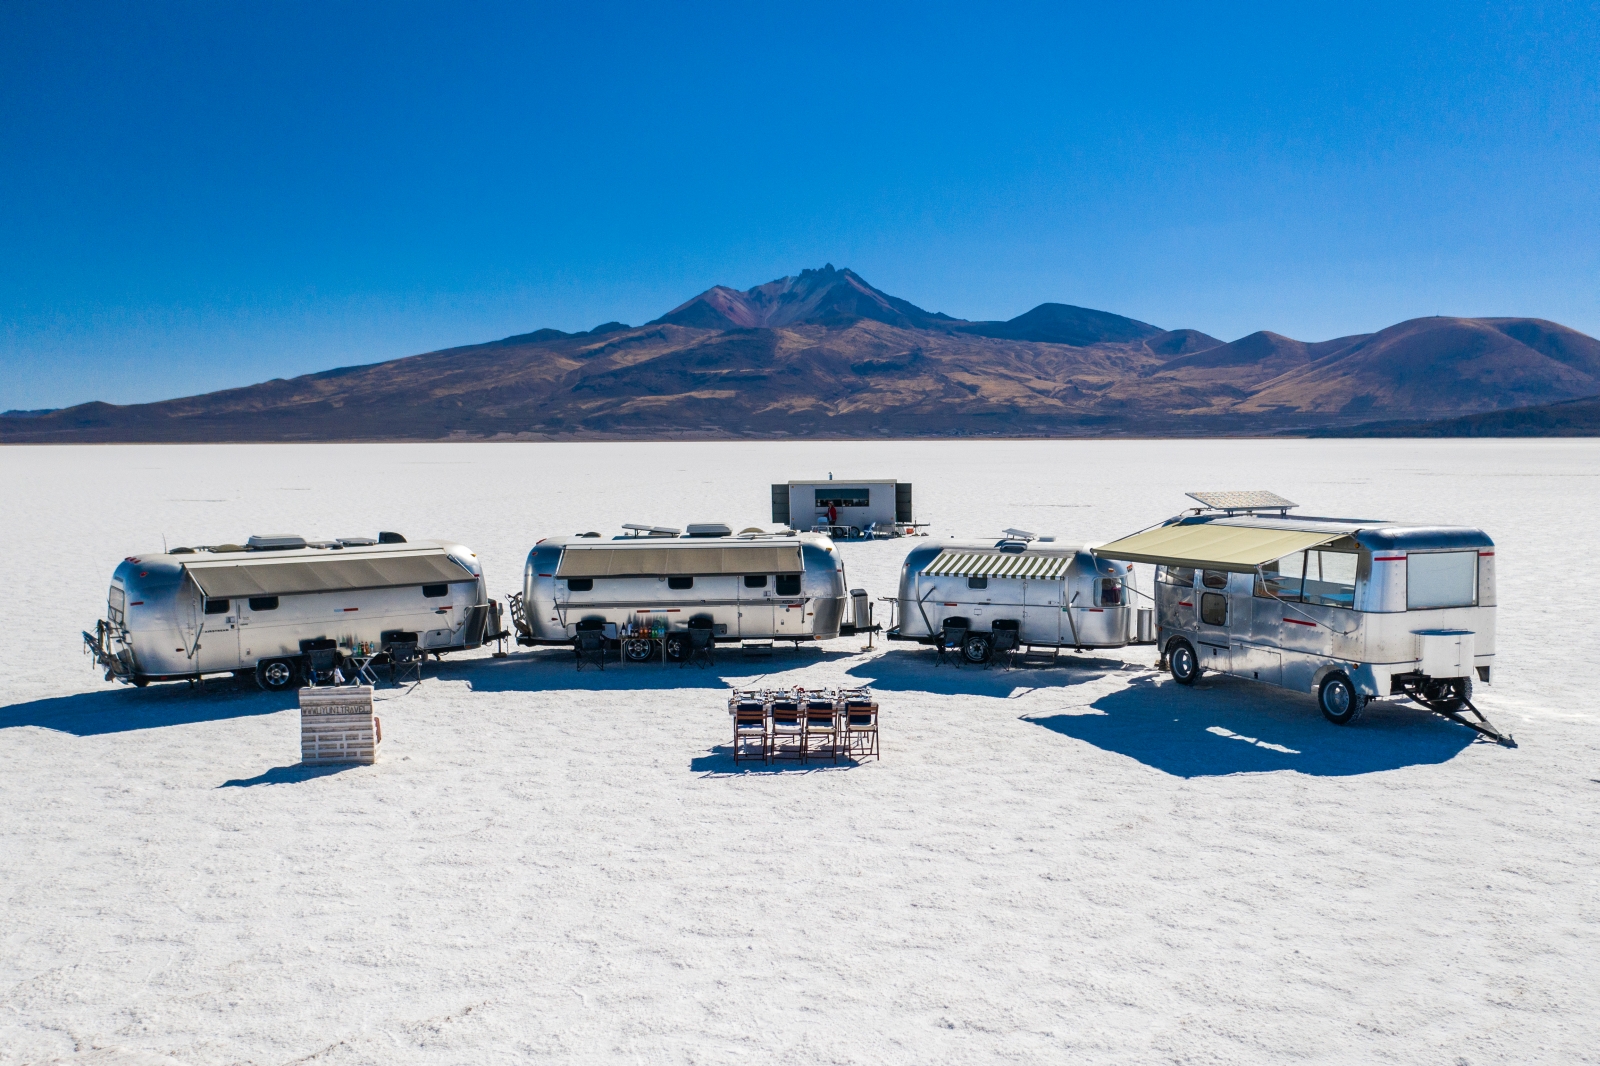 Full view of Deluxe Airstream Camper in Bolivia Salt Flats